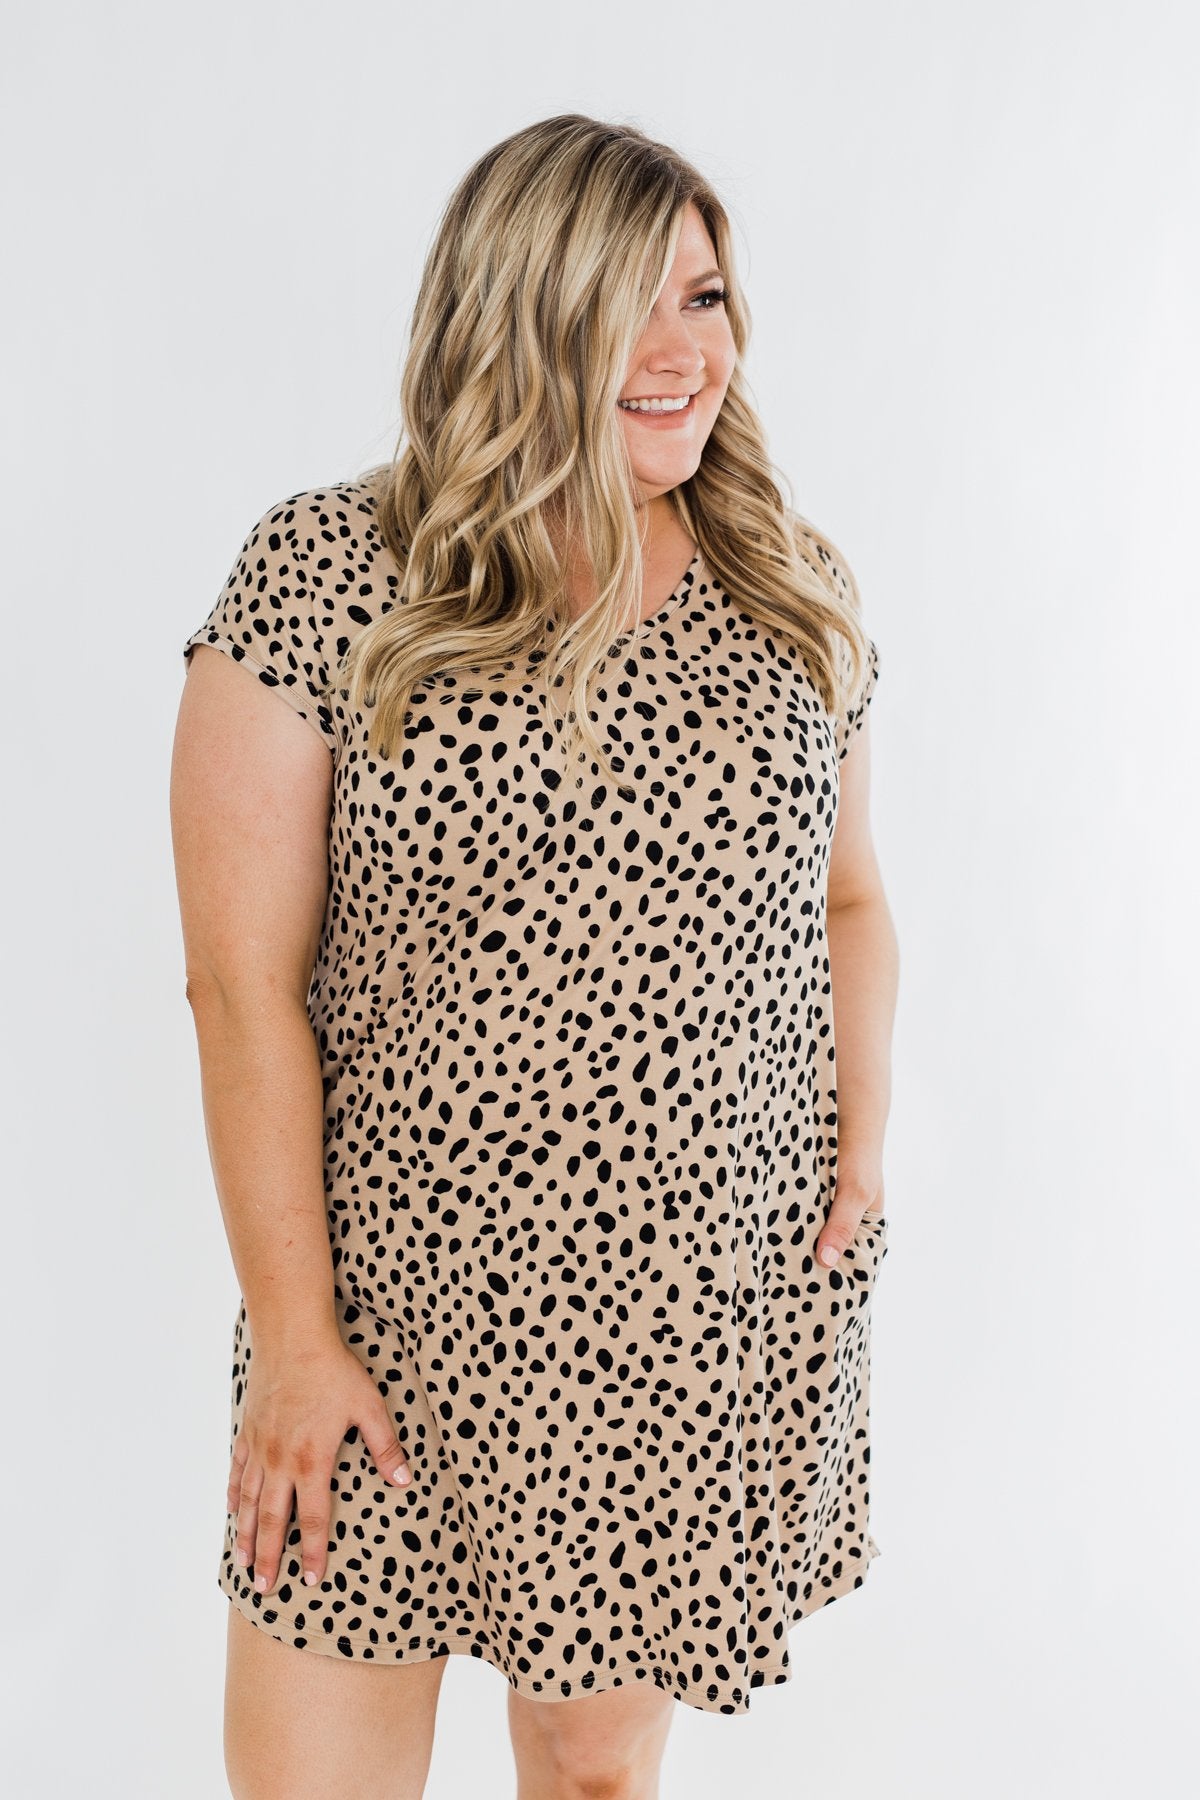 Sounds of the Wild Spotted Shapeless Dress- Taupe